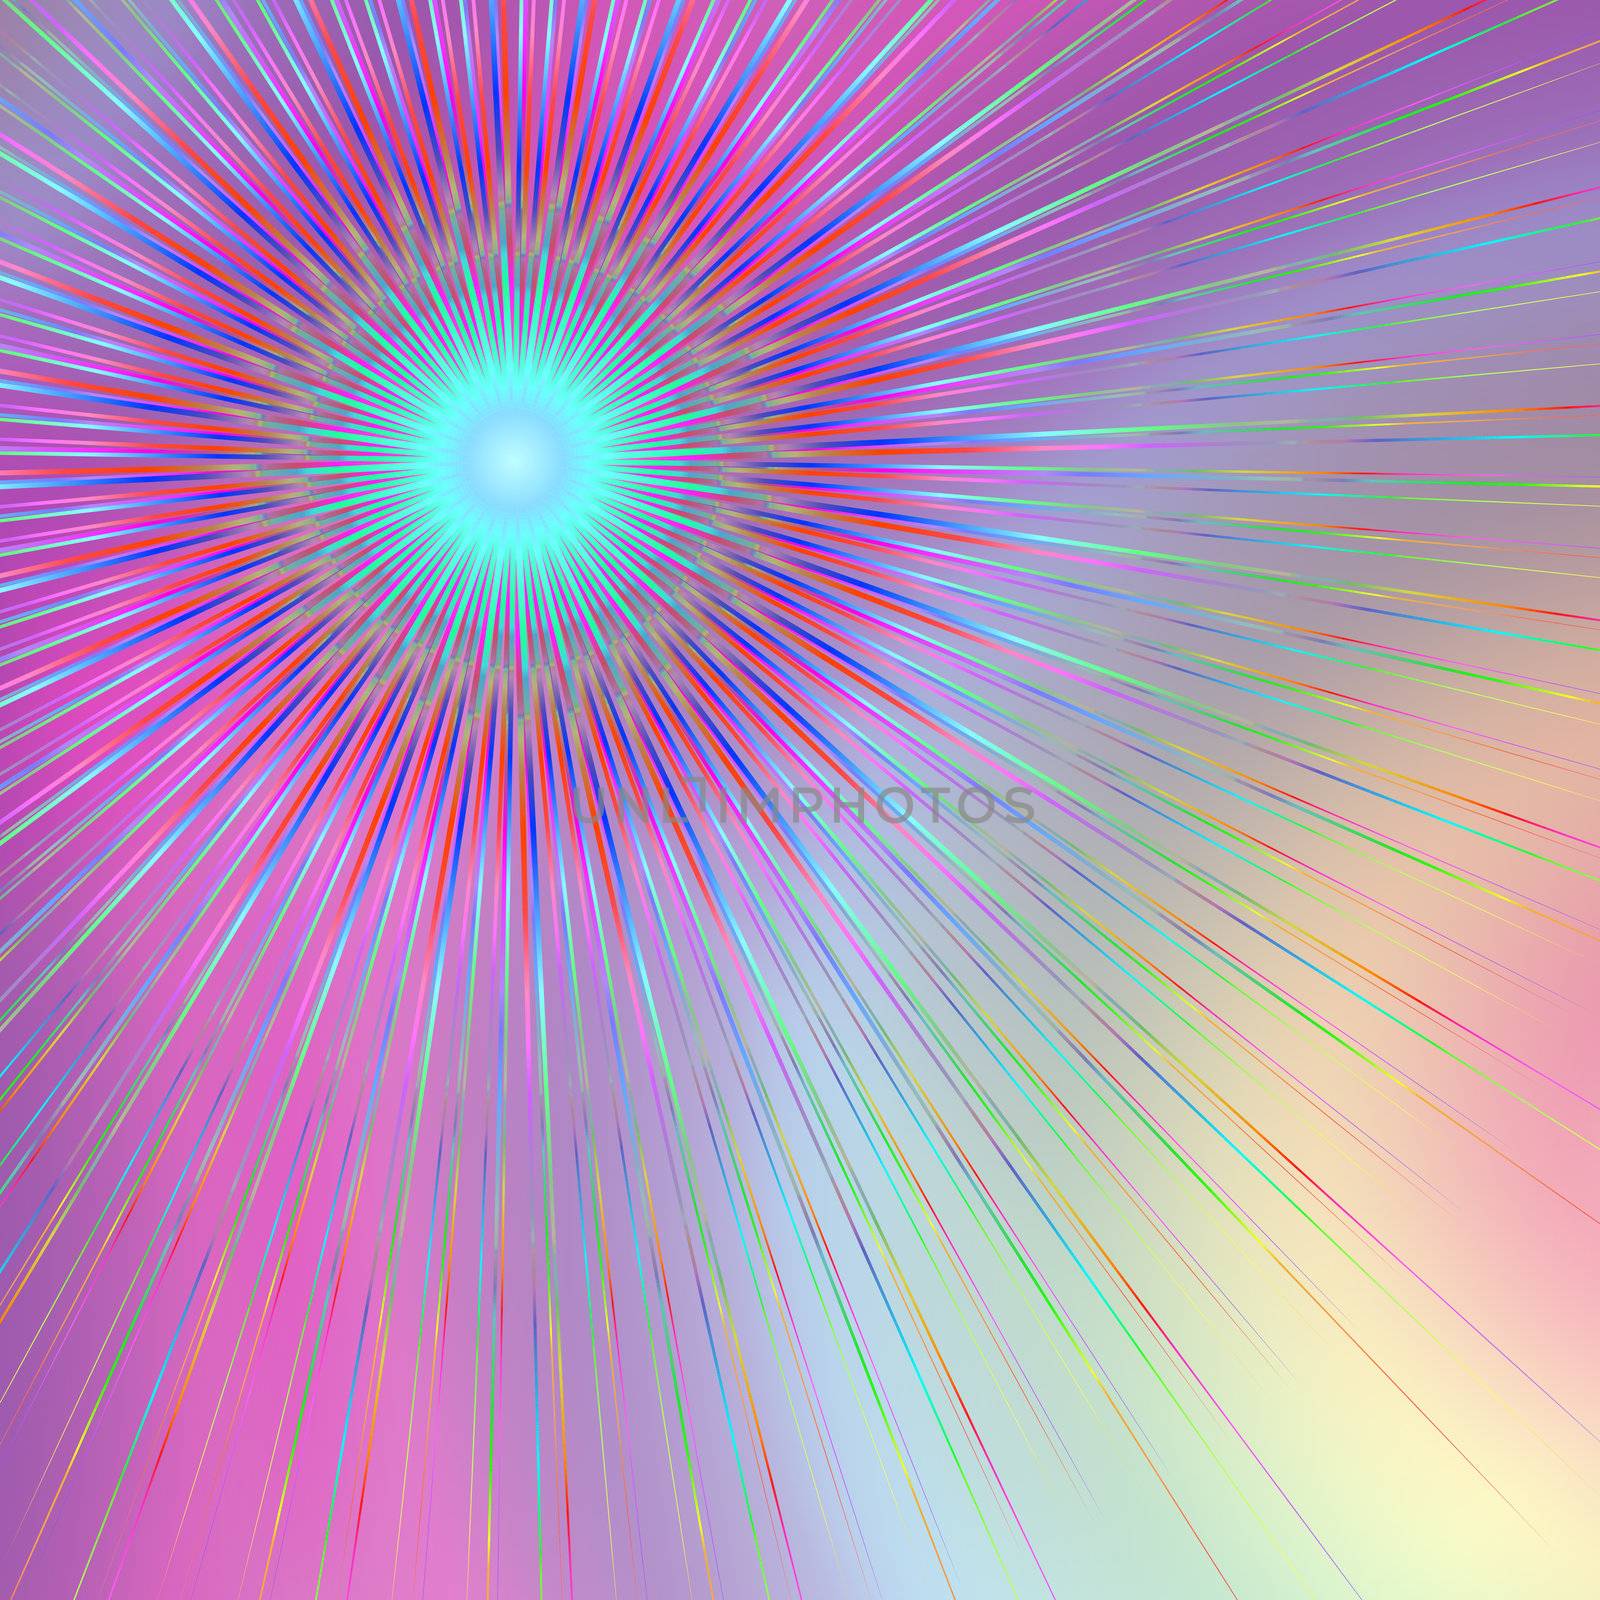 Abstract illustration depicting geometric colorful lines against a mix of pastel color background.